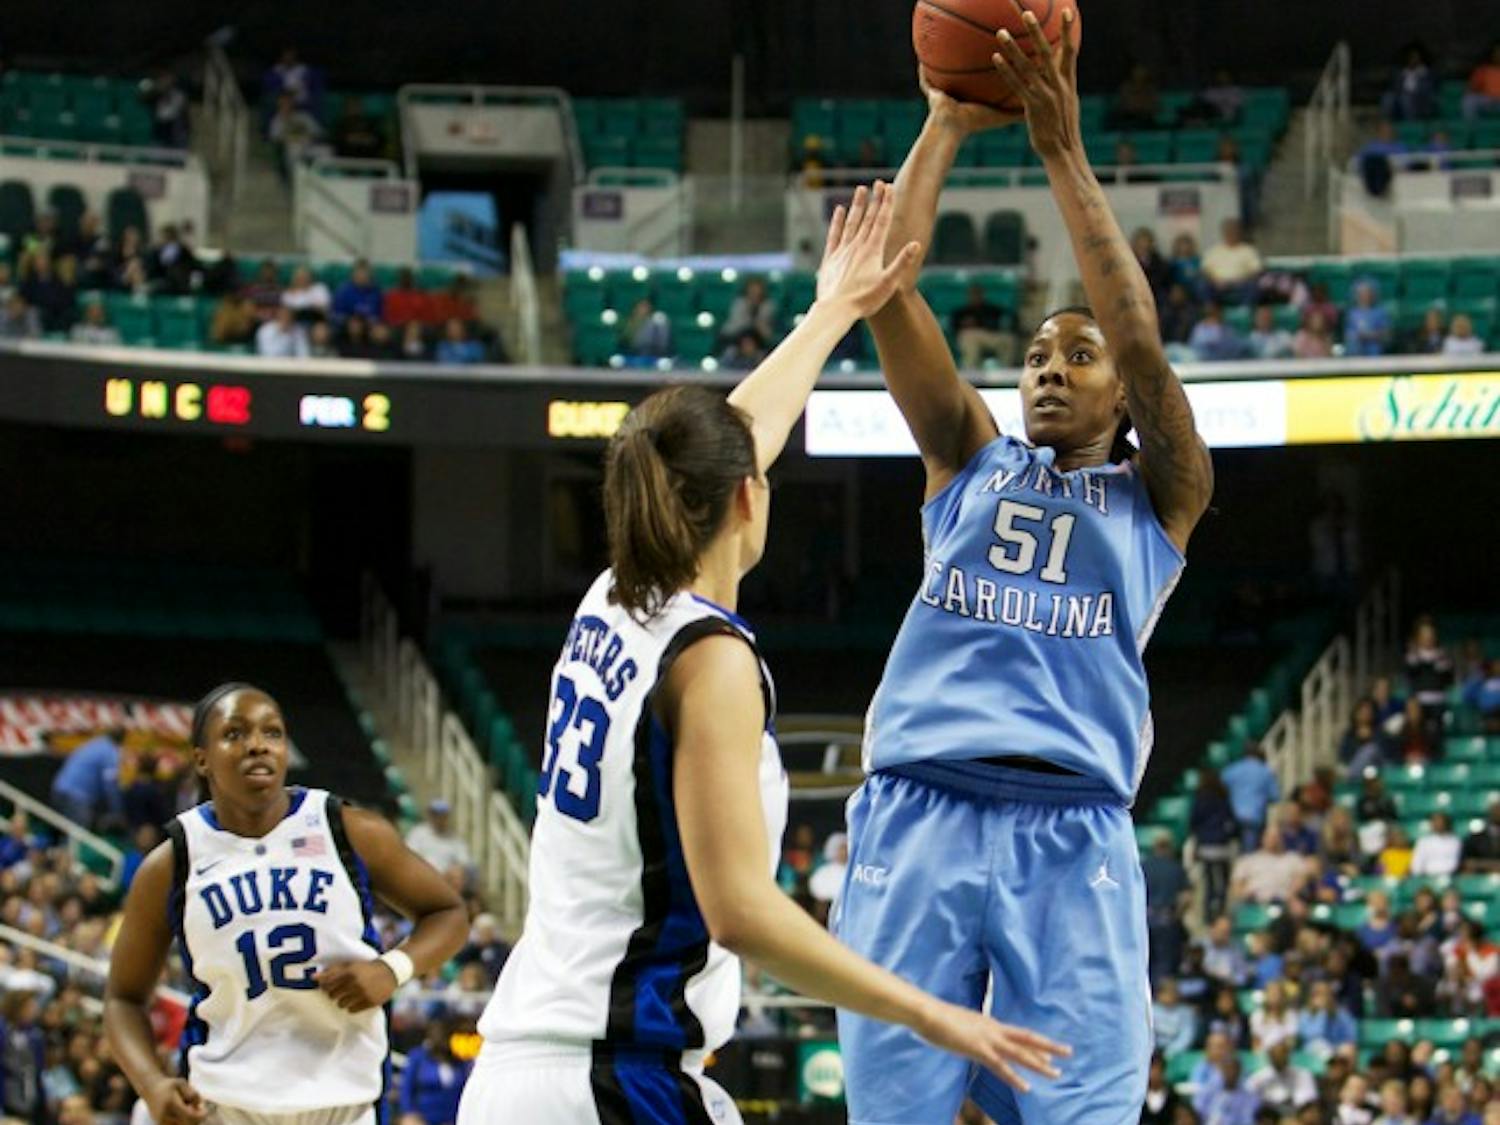 Jessica Breland takes a shot in the waning minutes of the ACC title game. She had 27 points in the game.